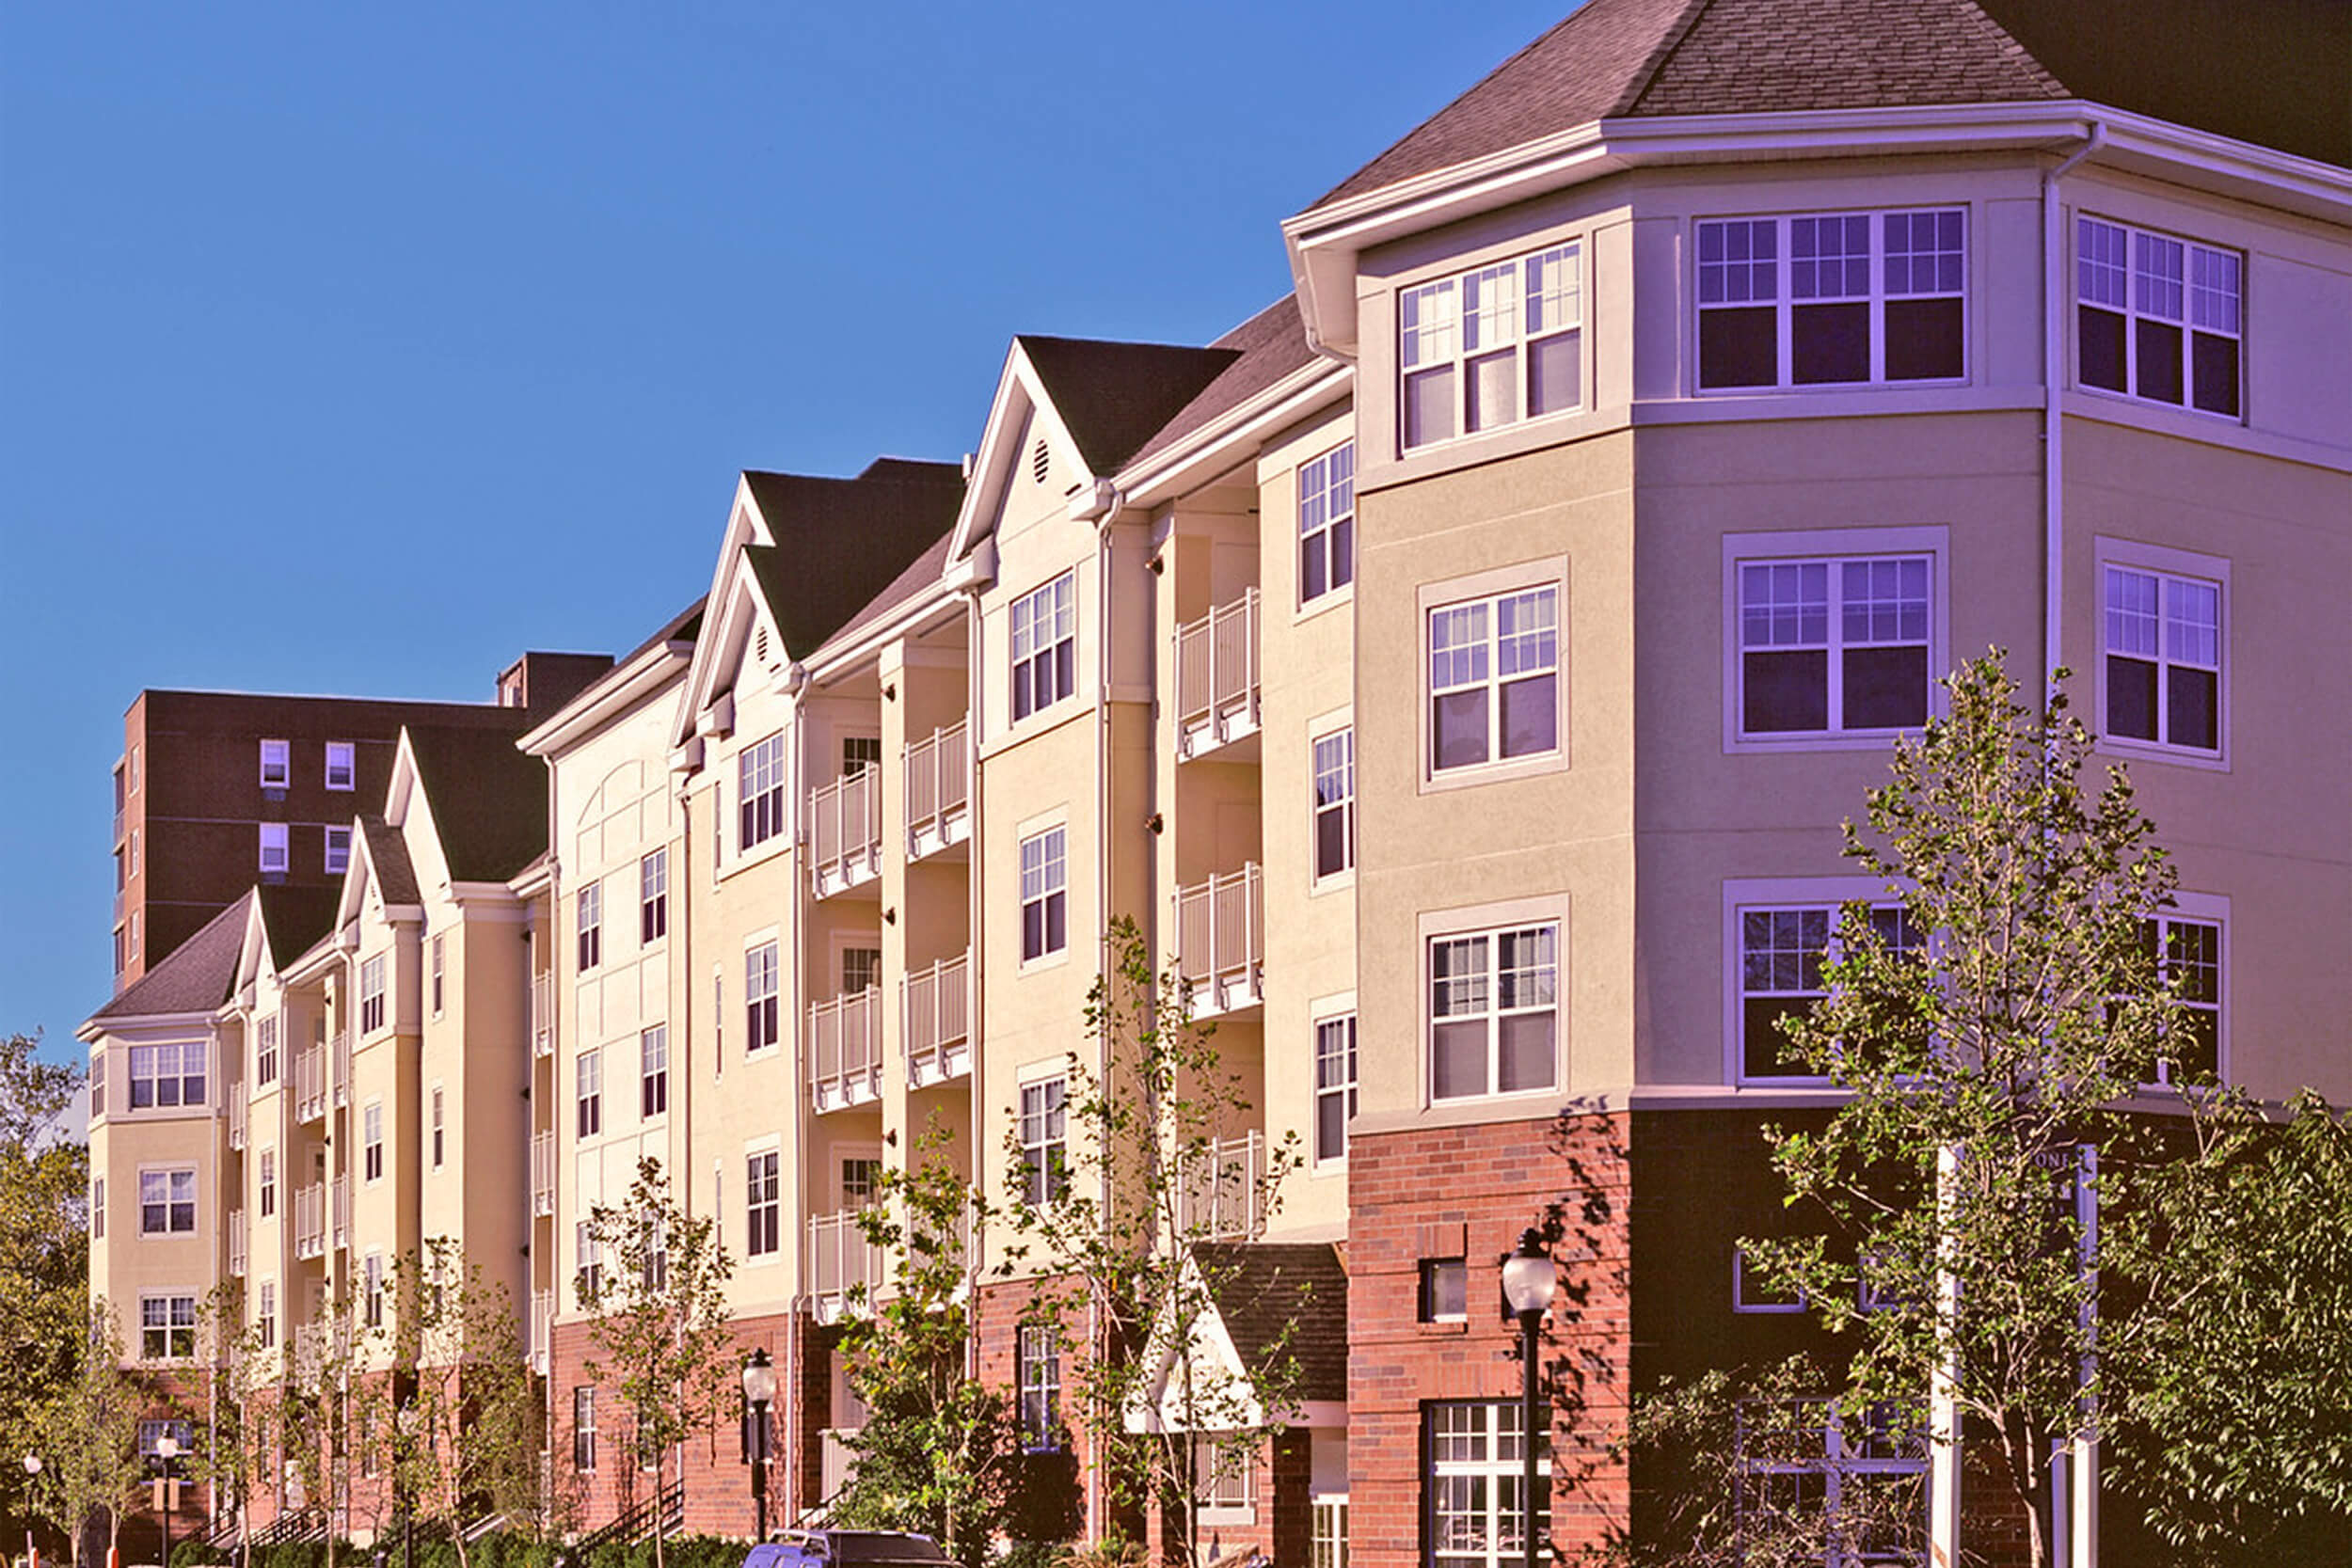 Exterior daytime street view of a multi-unit housing complex. The facade of the building features neutral colored siding with brick accents.